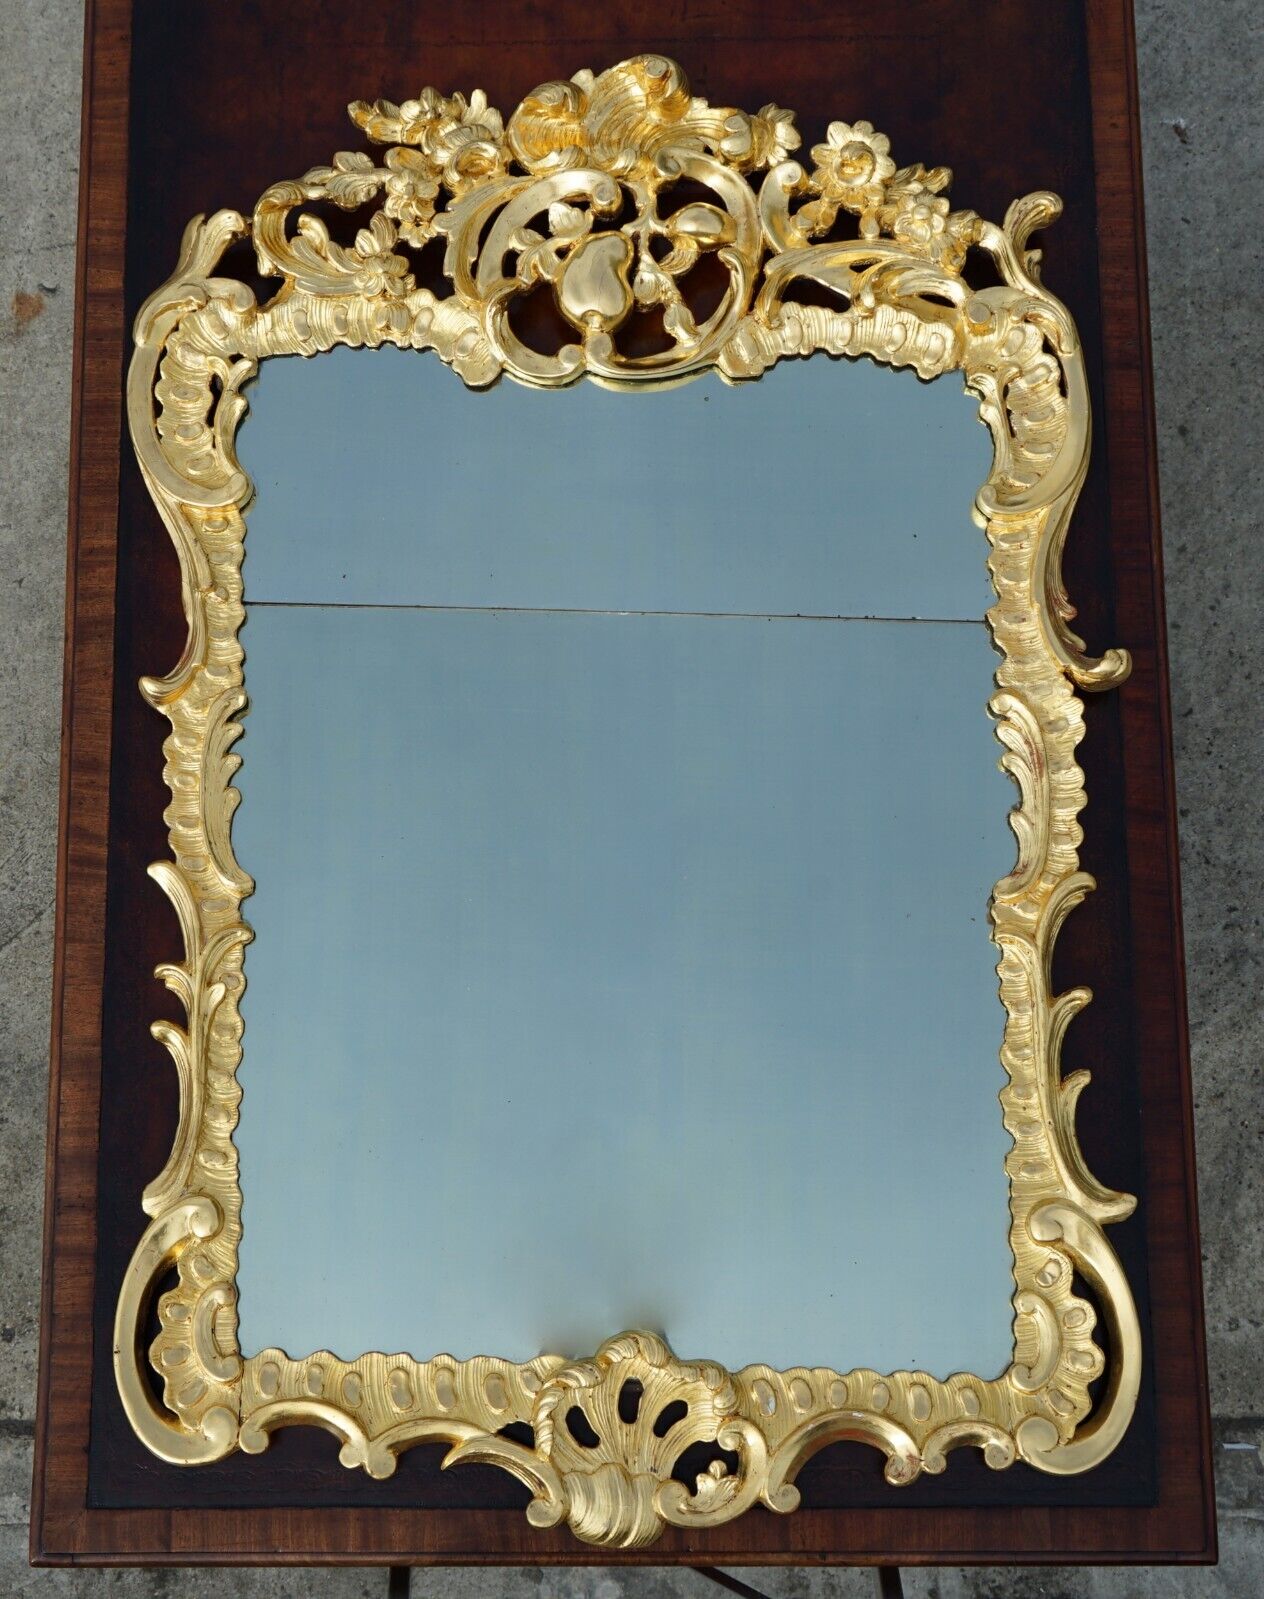 EXQUISITE FRENCH ANTIQUE LOUIS XV PERIOD 1770 GOLD GILT MIRROR WITH FOXED PLATE